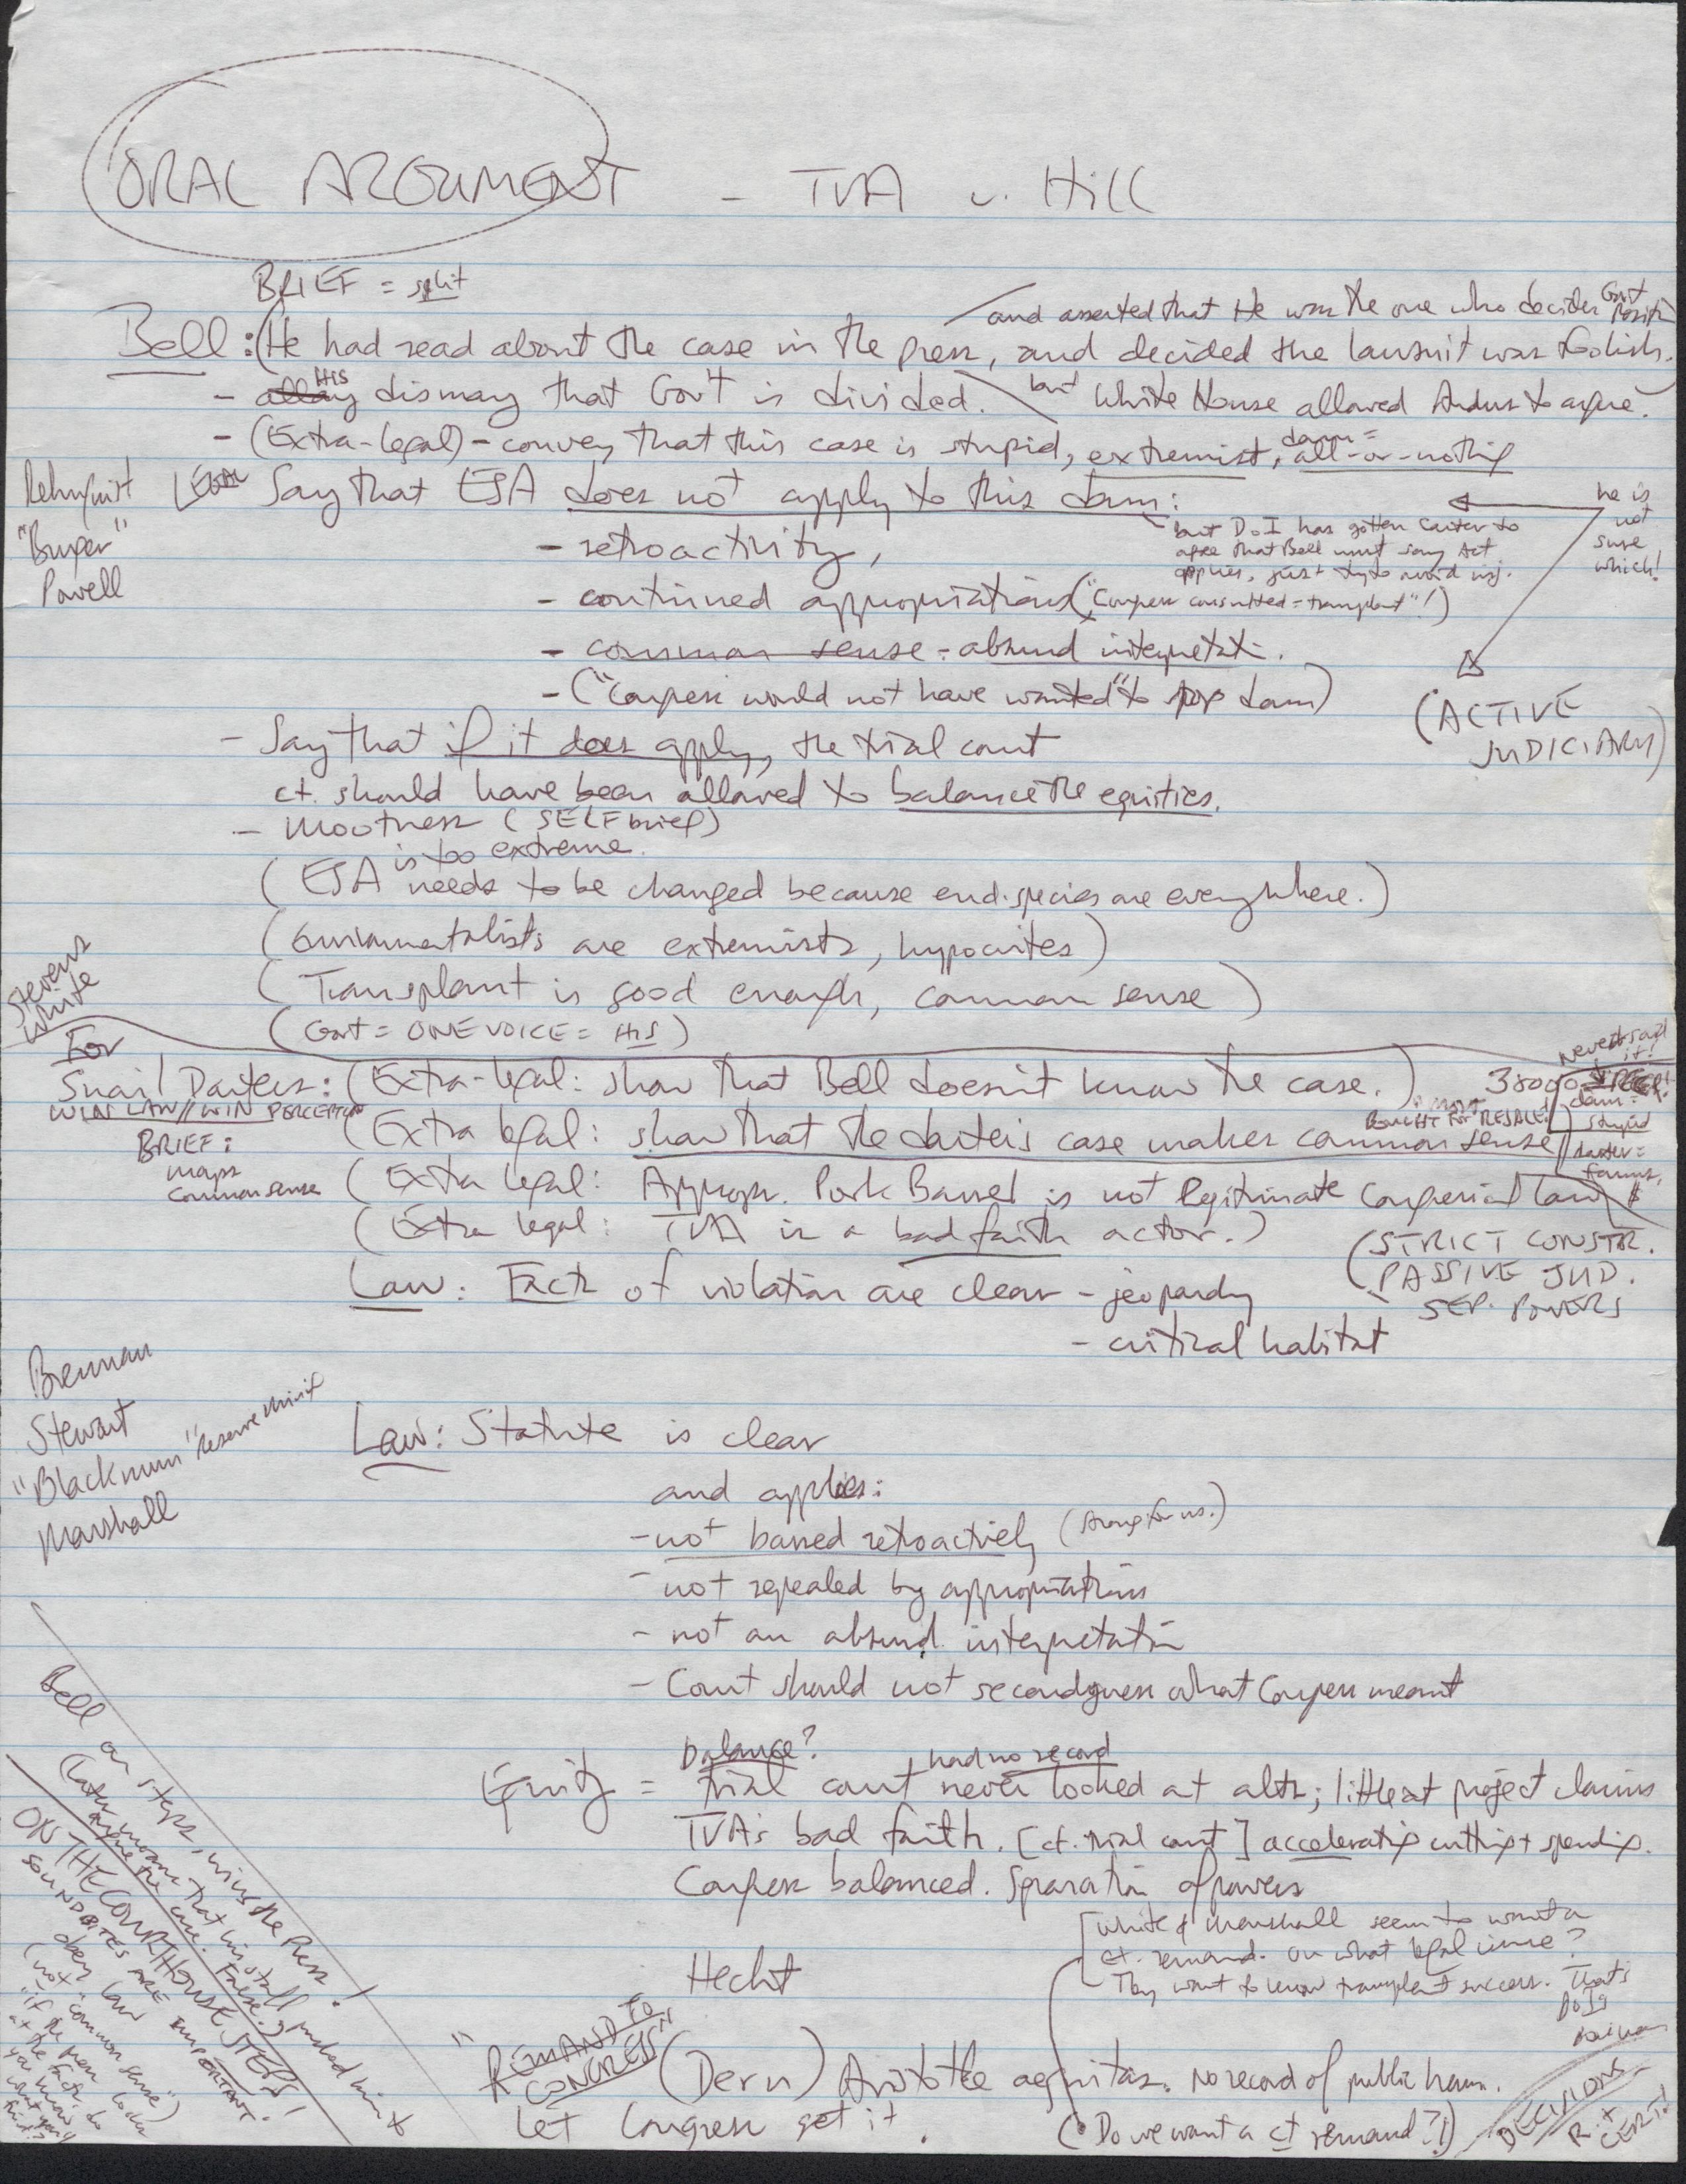 Page of note paper with handwritten notes, at top of page is written "ORAL ARGUMENT"